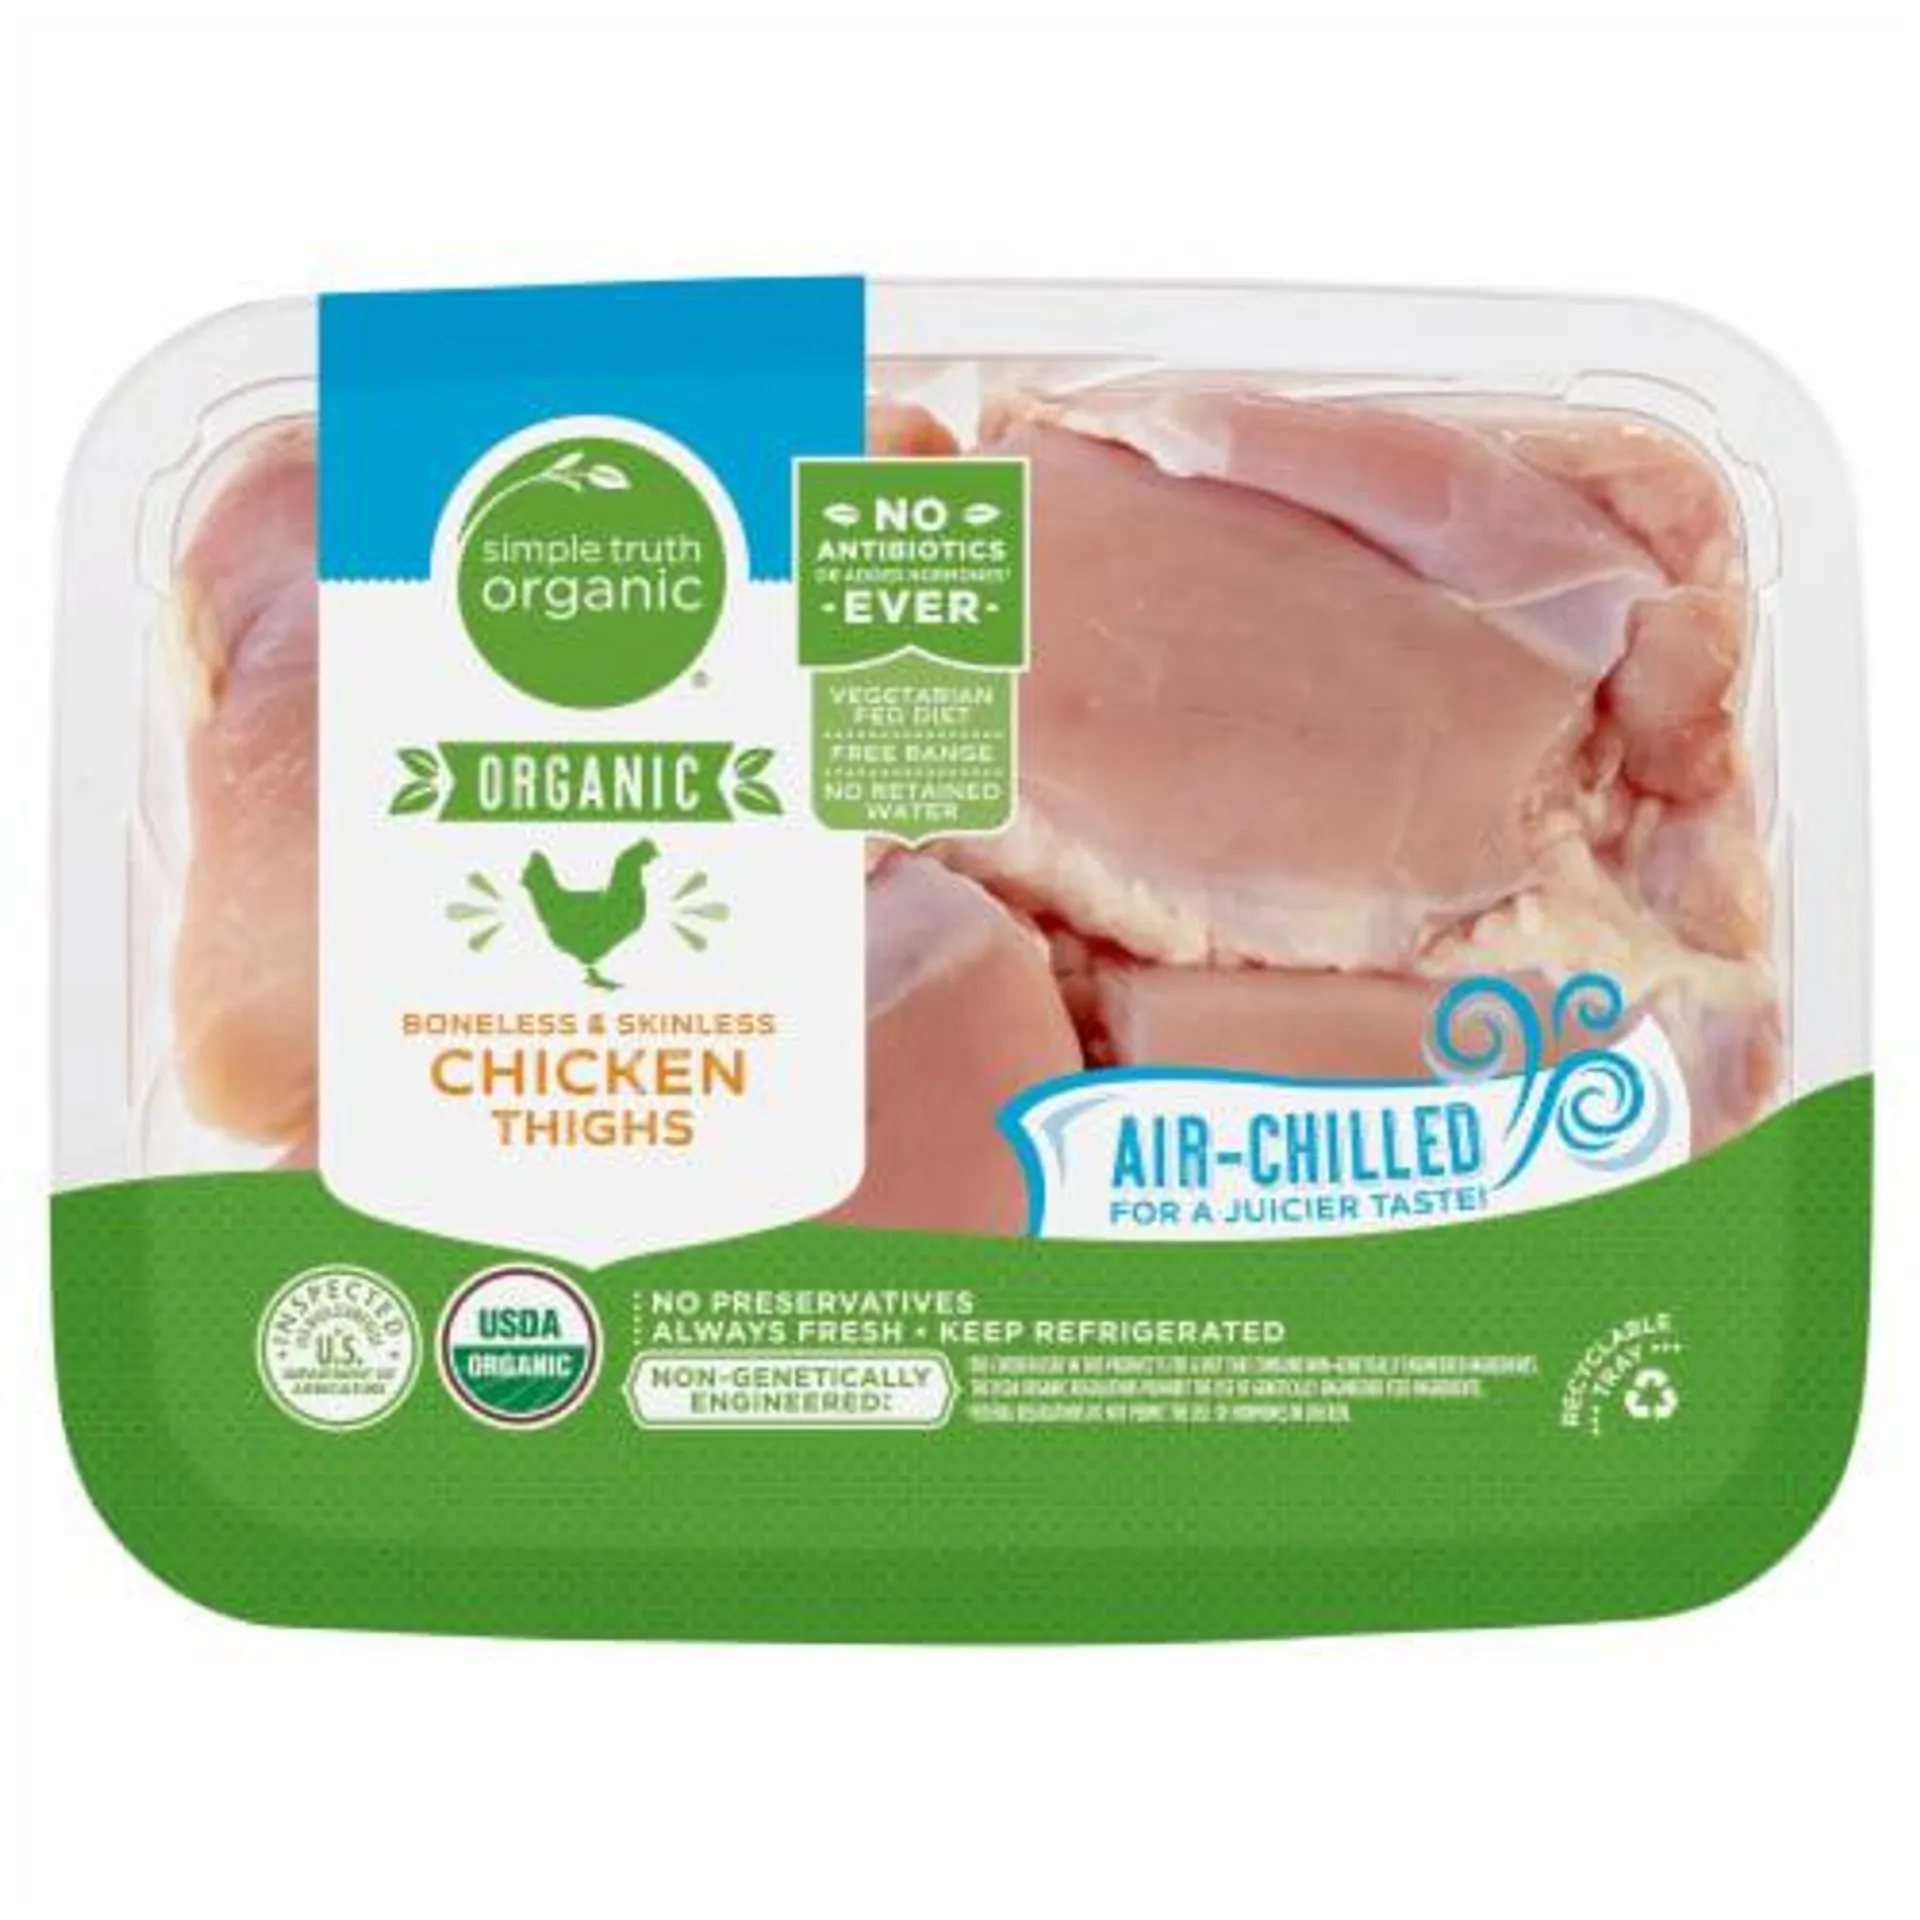 Simple Truth Organic® Air-Chilled Boneless Skinless Chicken Thighs